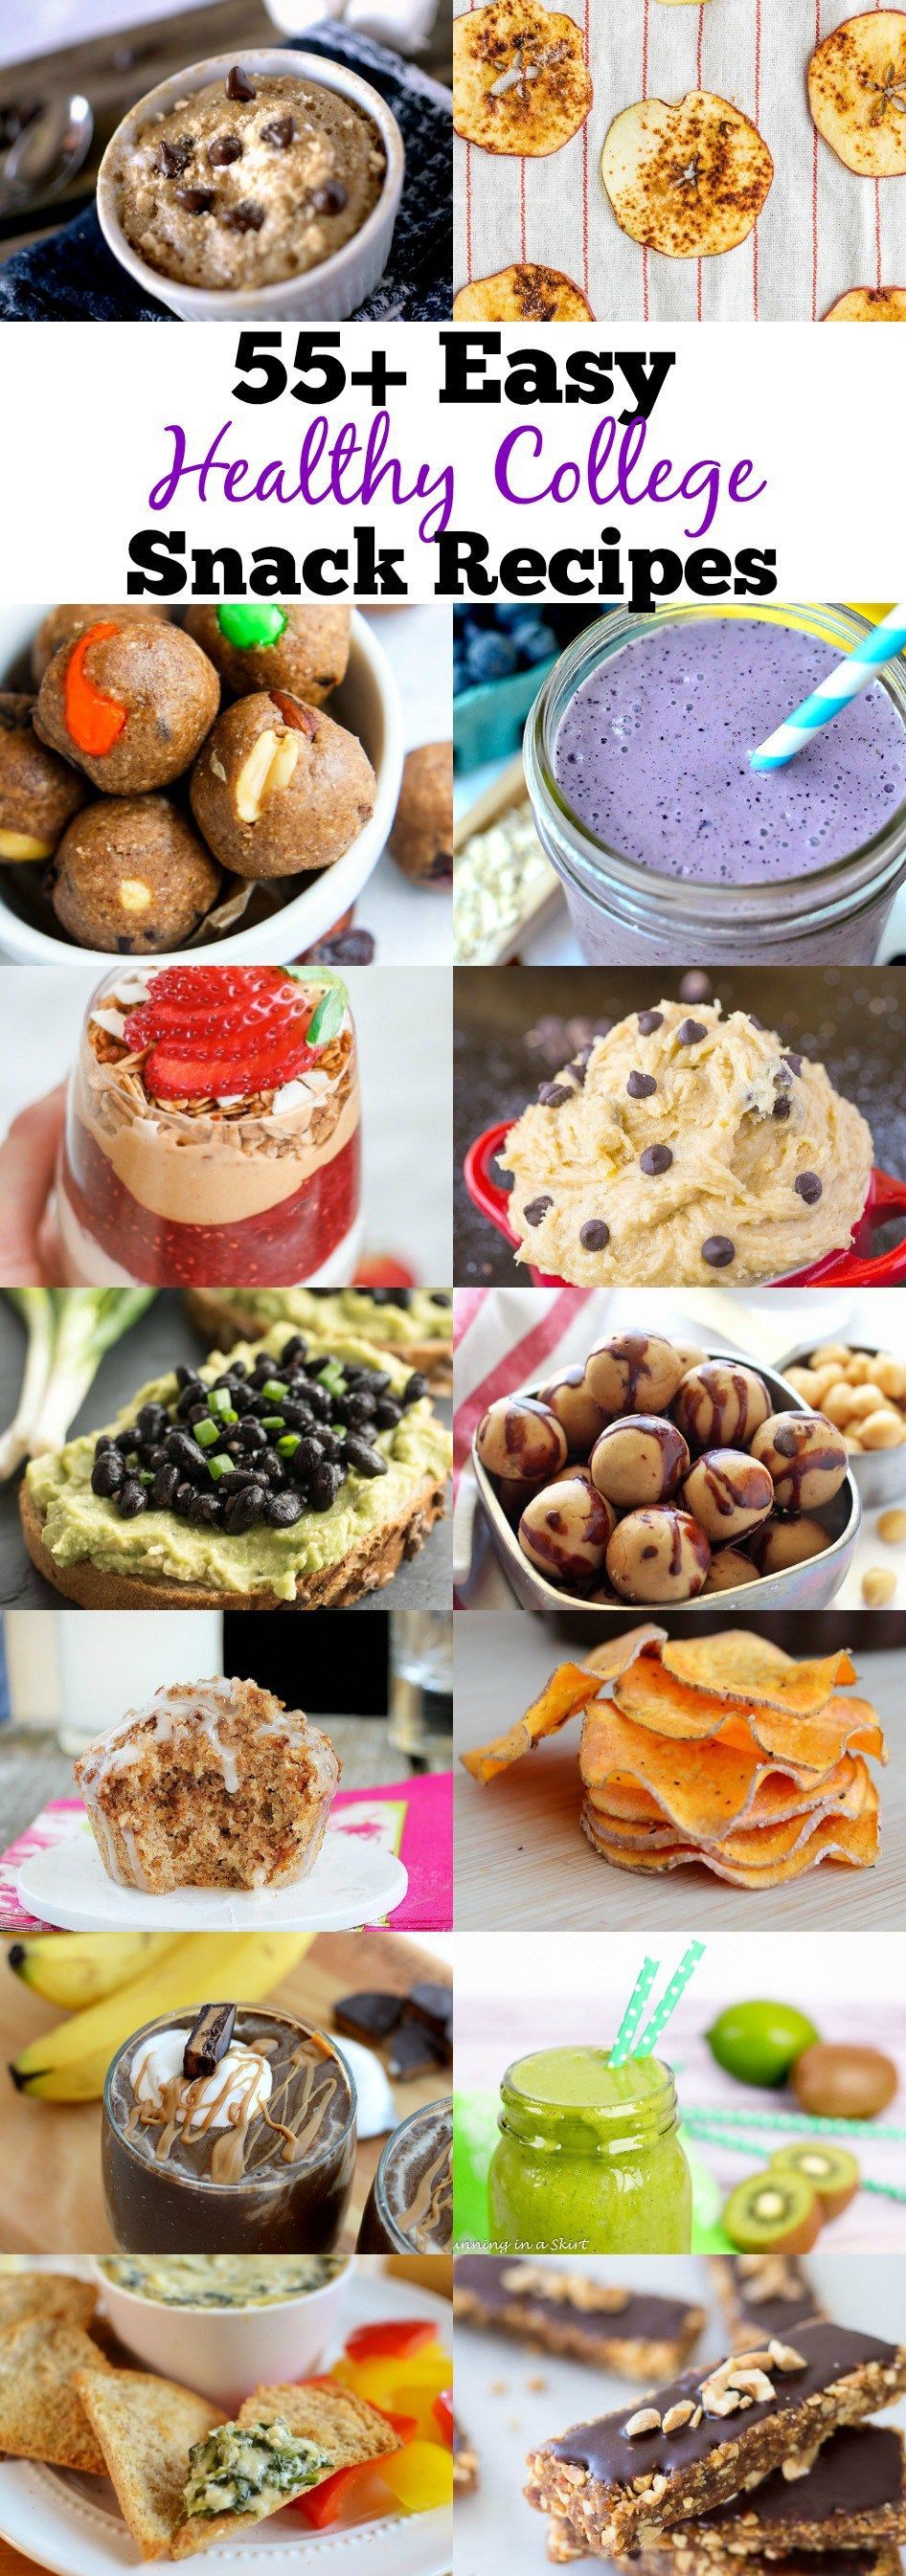 12 healthy recipes For College Students people ideas